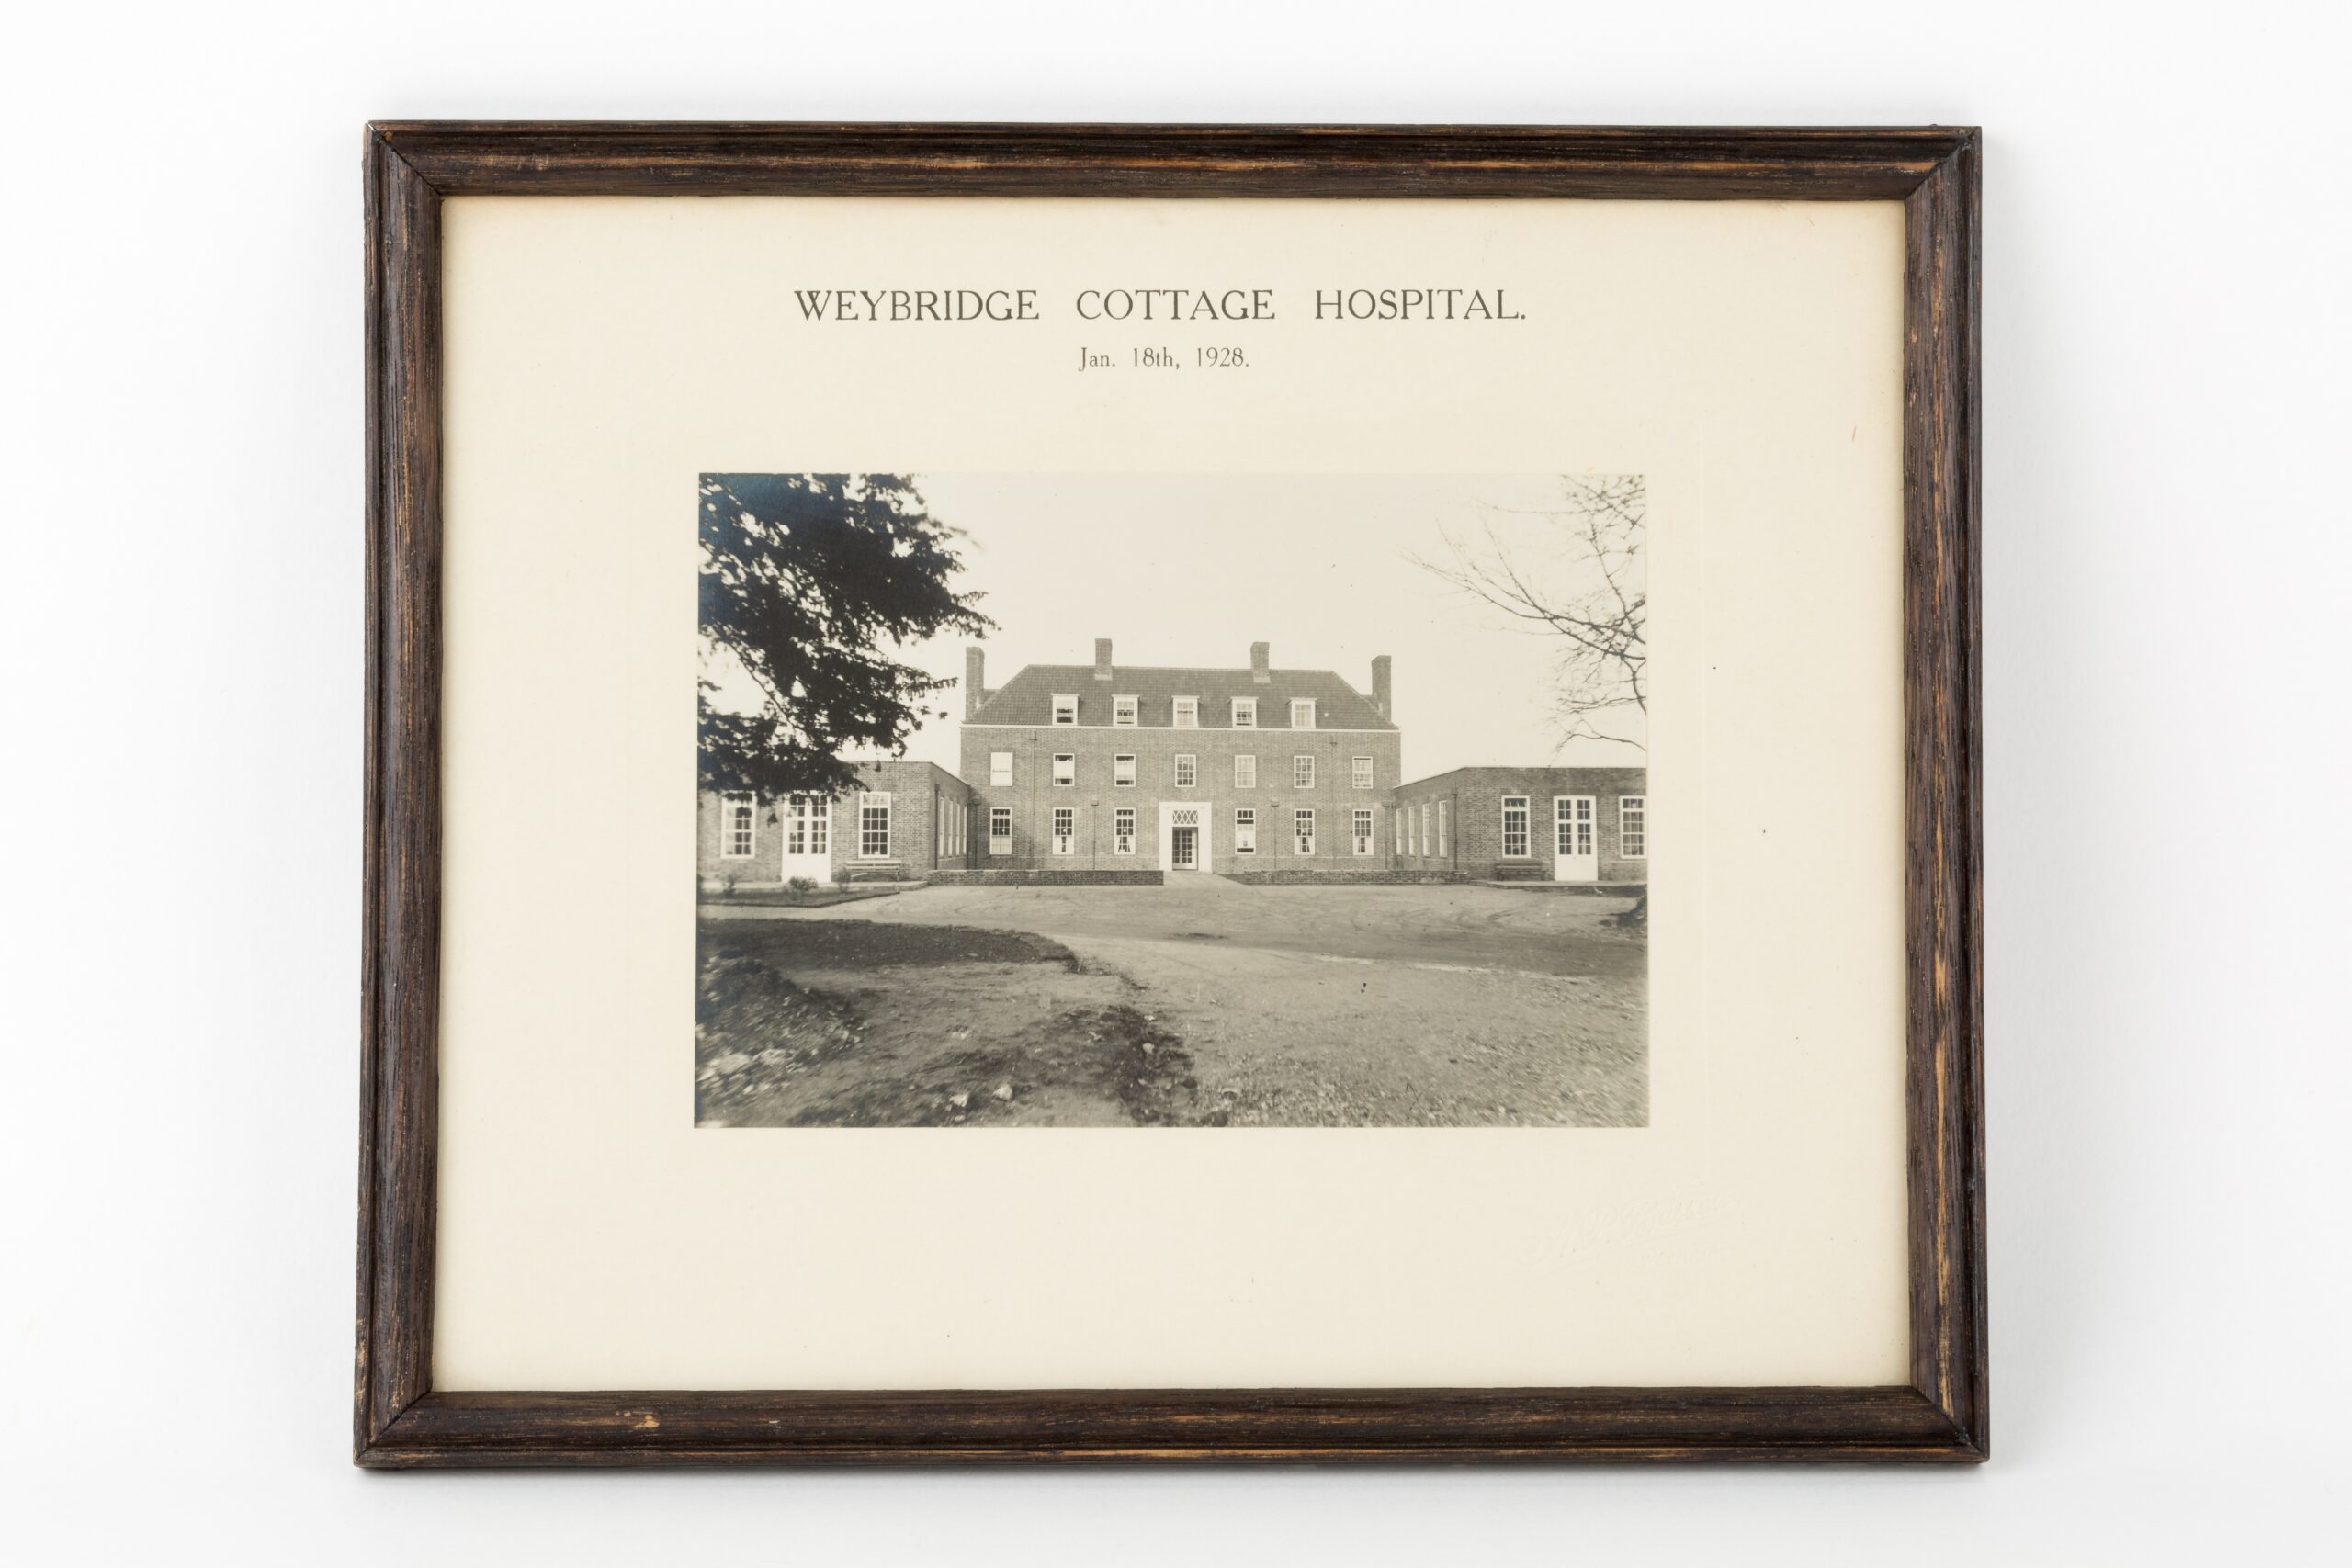 Framed black and white photograph of the front view of the new Weybridge Cottage Hospital, Church Street, 1928. It was donated by a nurse who worked at the hospital during the Second World War. Undated but post-1928.